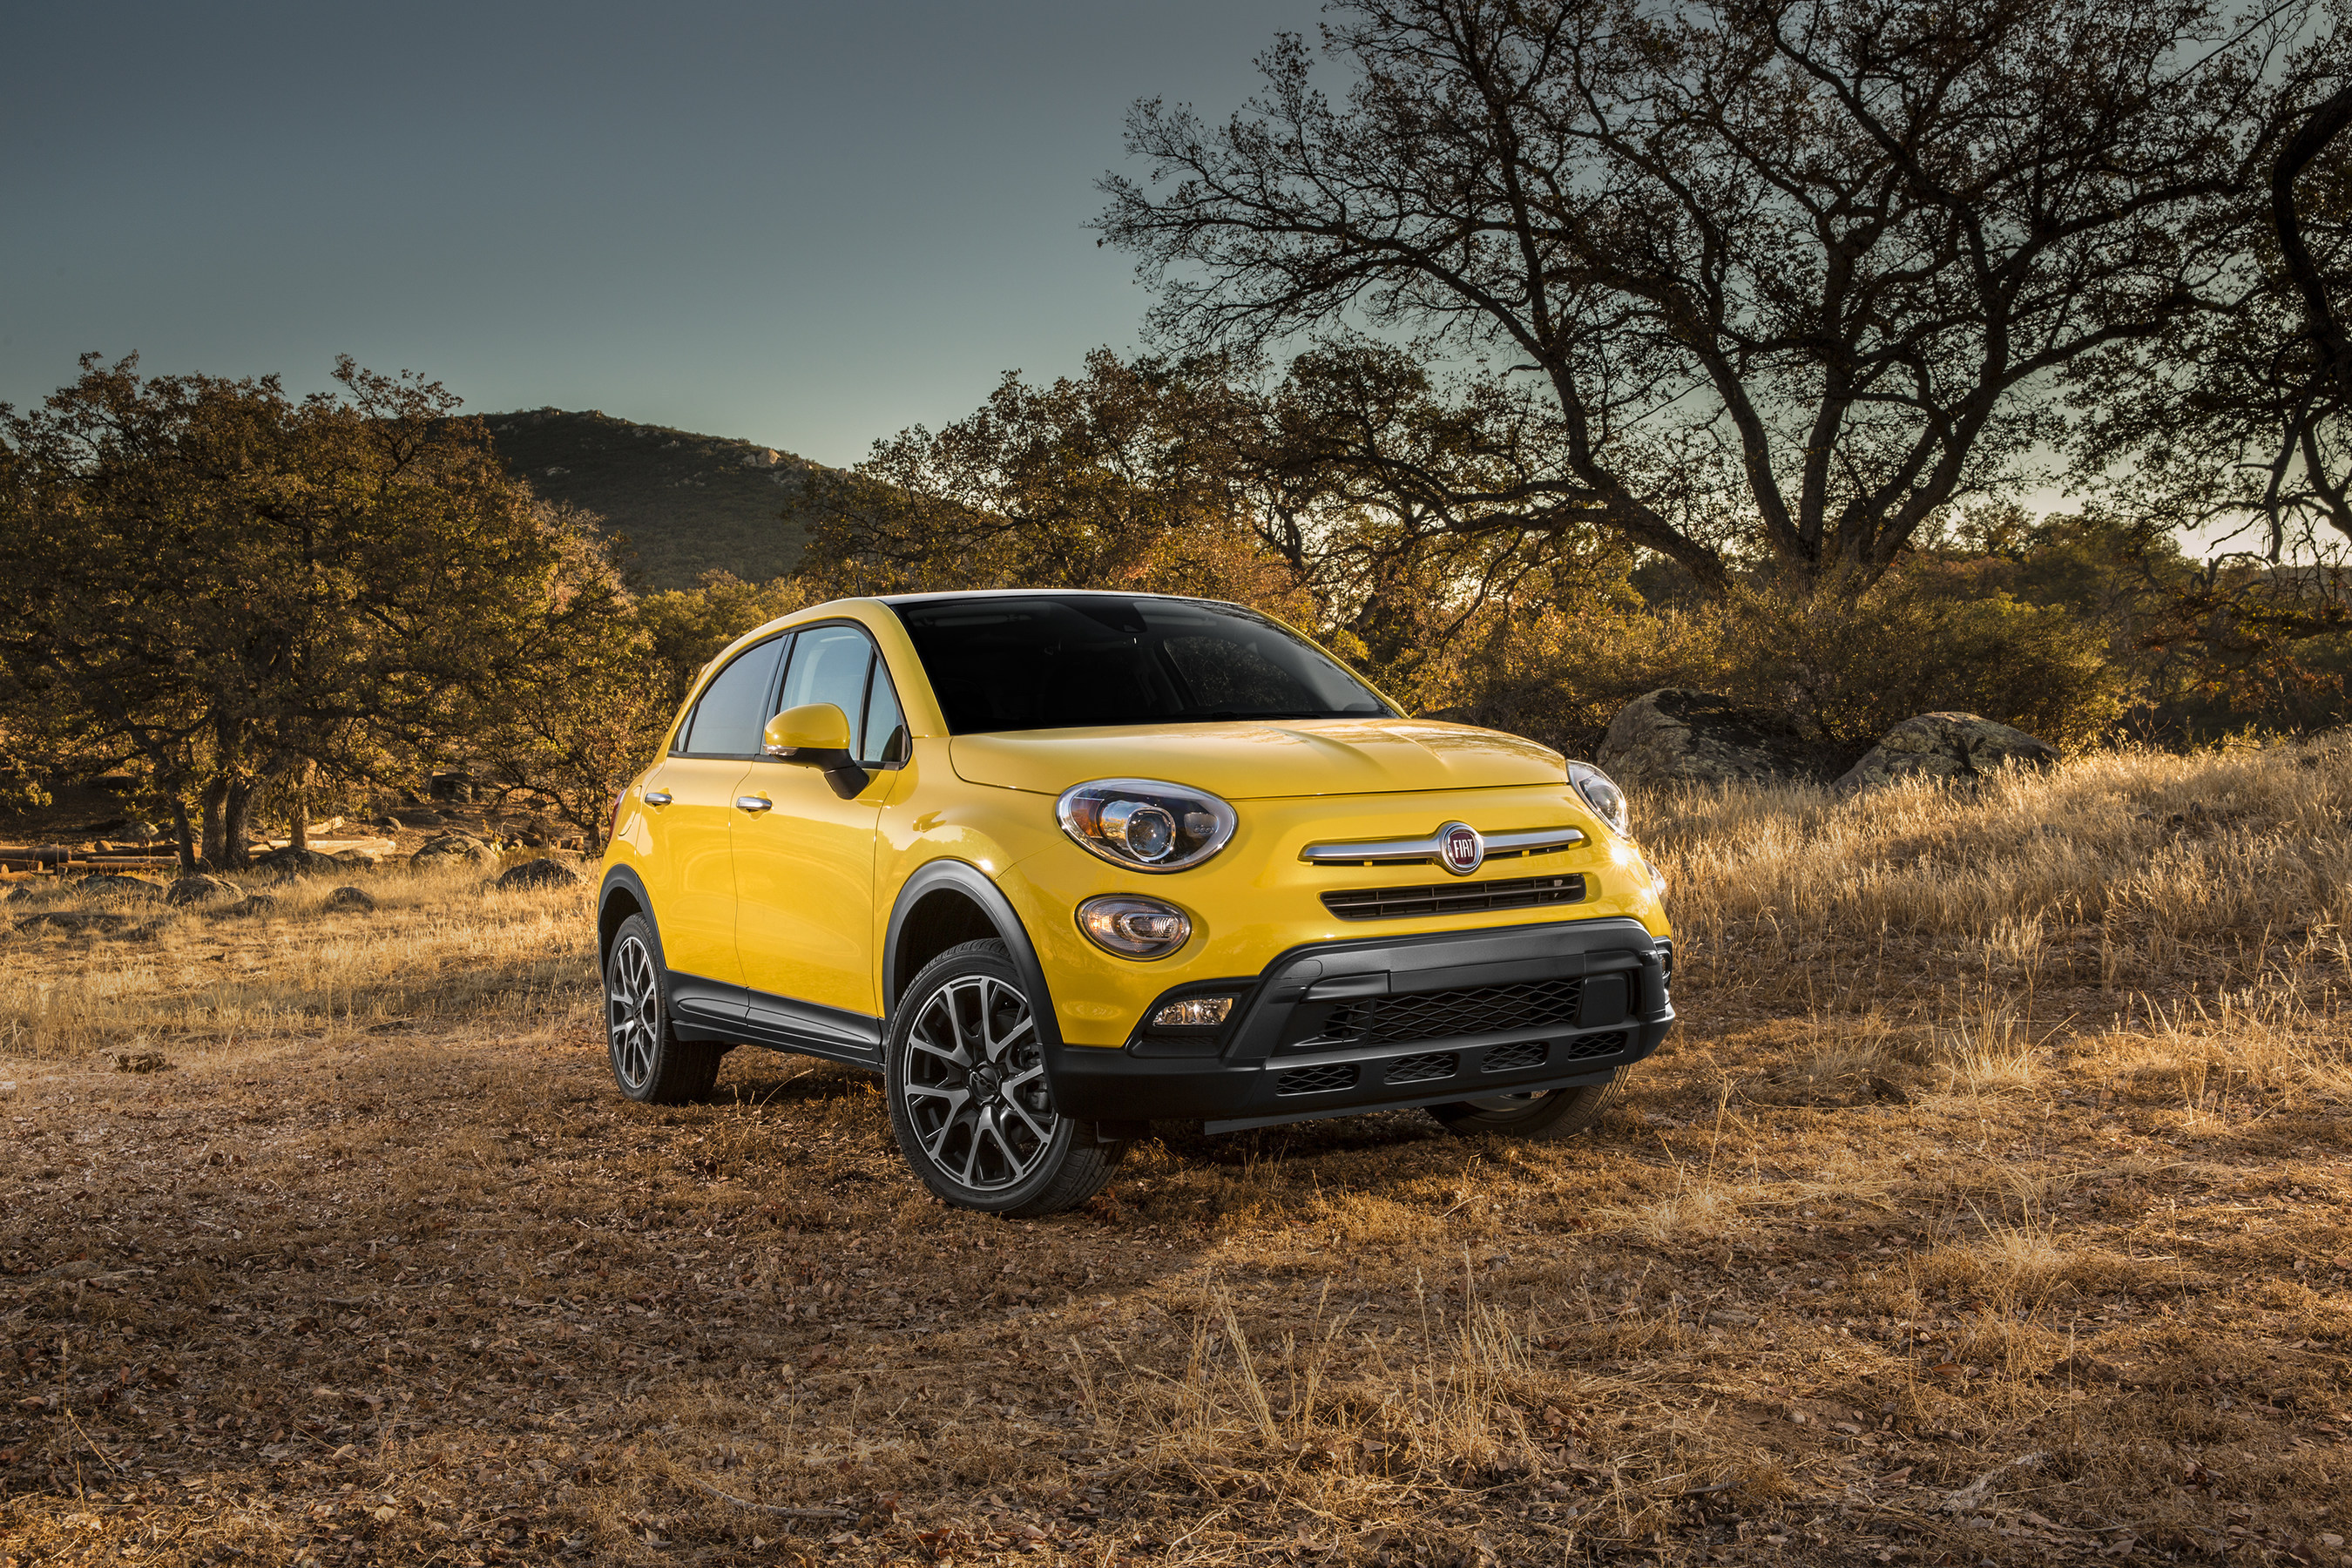 All-new 2016 Fiat 500X Trekking Plus combines iconic Italian style with functionality, performance and a more rugged look.